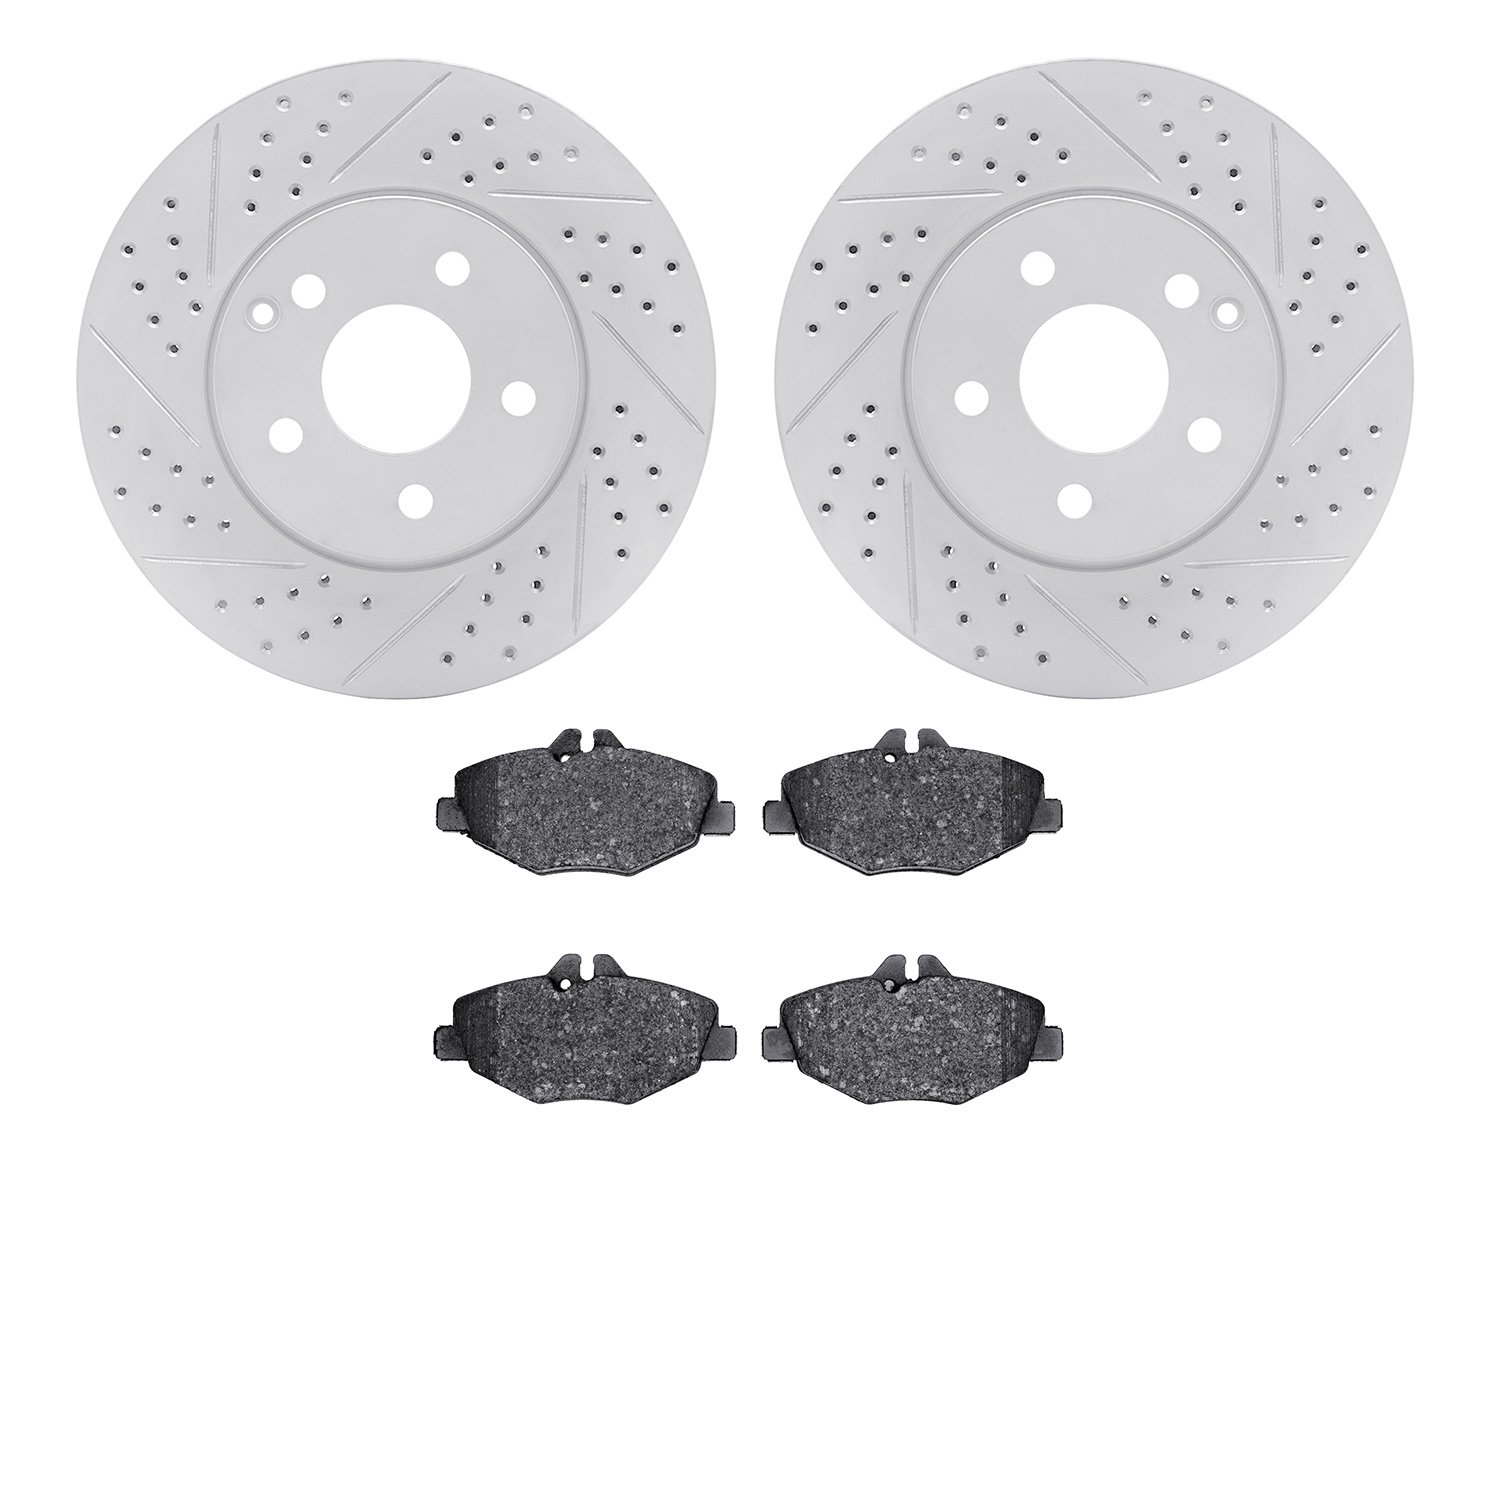 2502-63024 Geoperformance Drilled/Slotted Rotors w/5000 Advanced Brake Pads Kit, 2003-2009 Mercedes-Benz, Position: Front